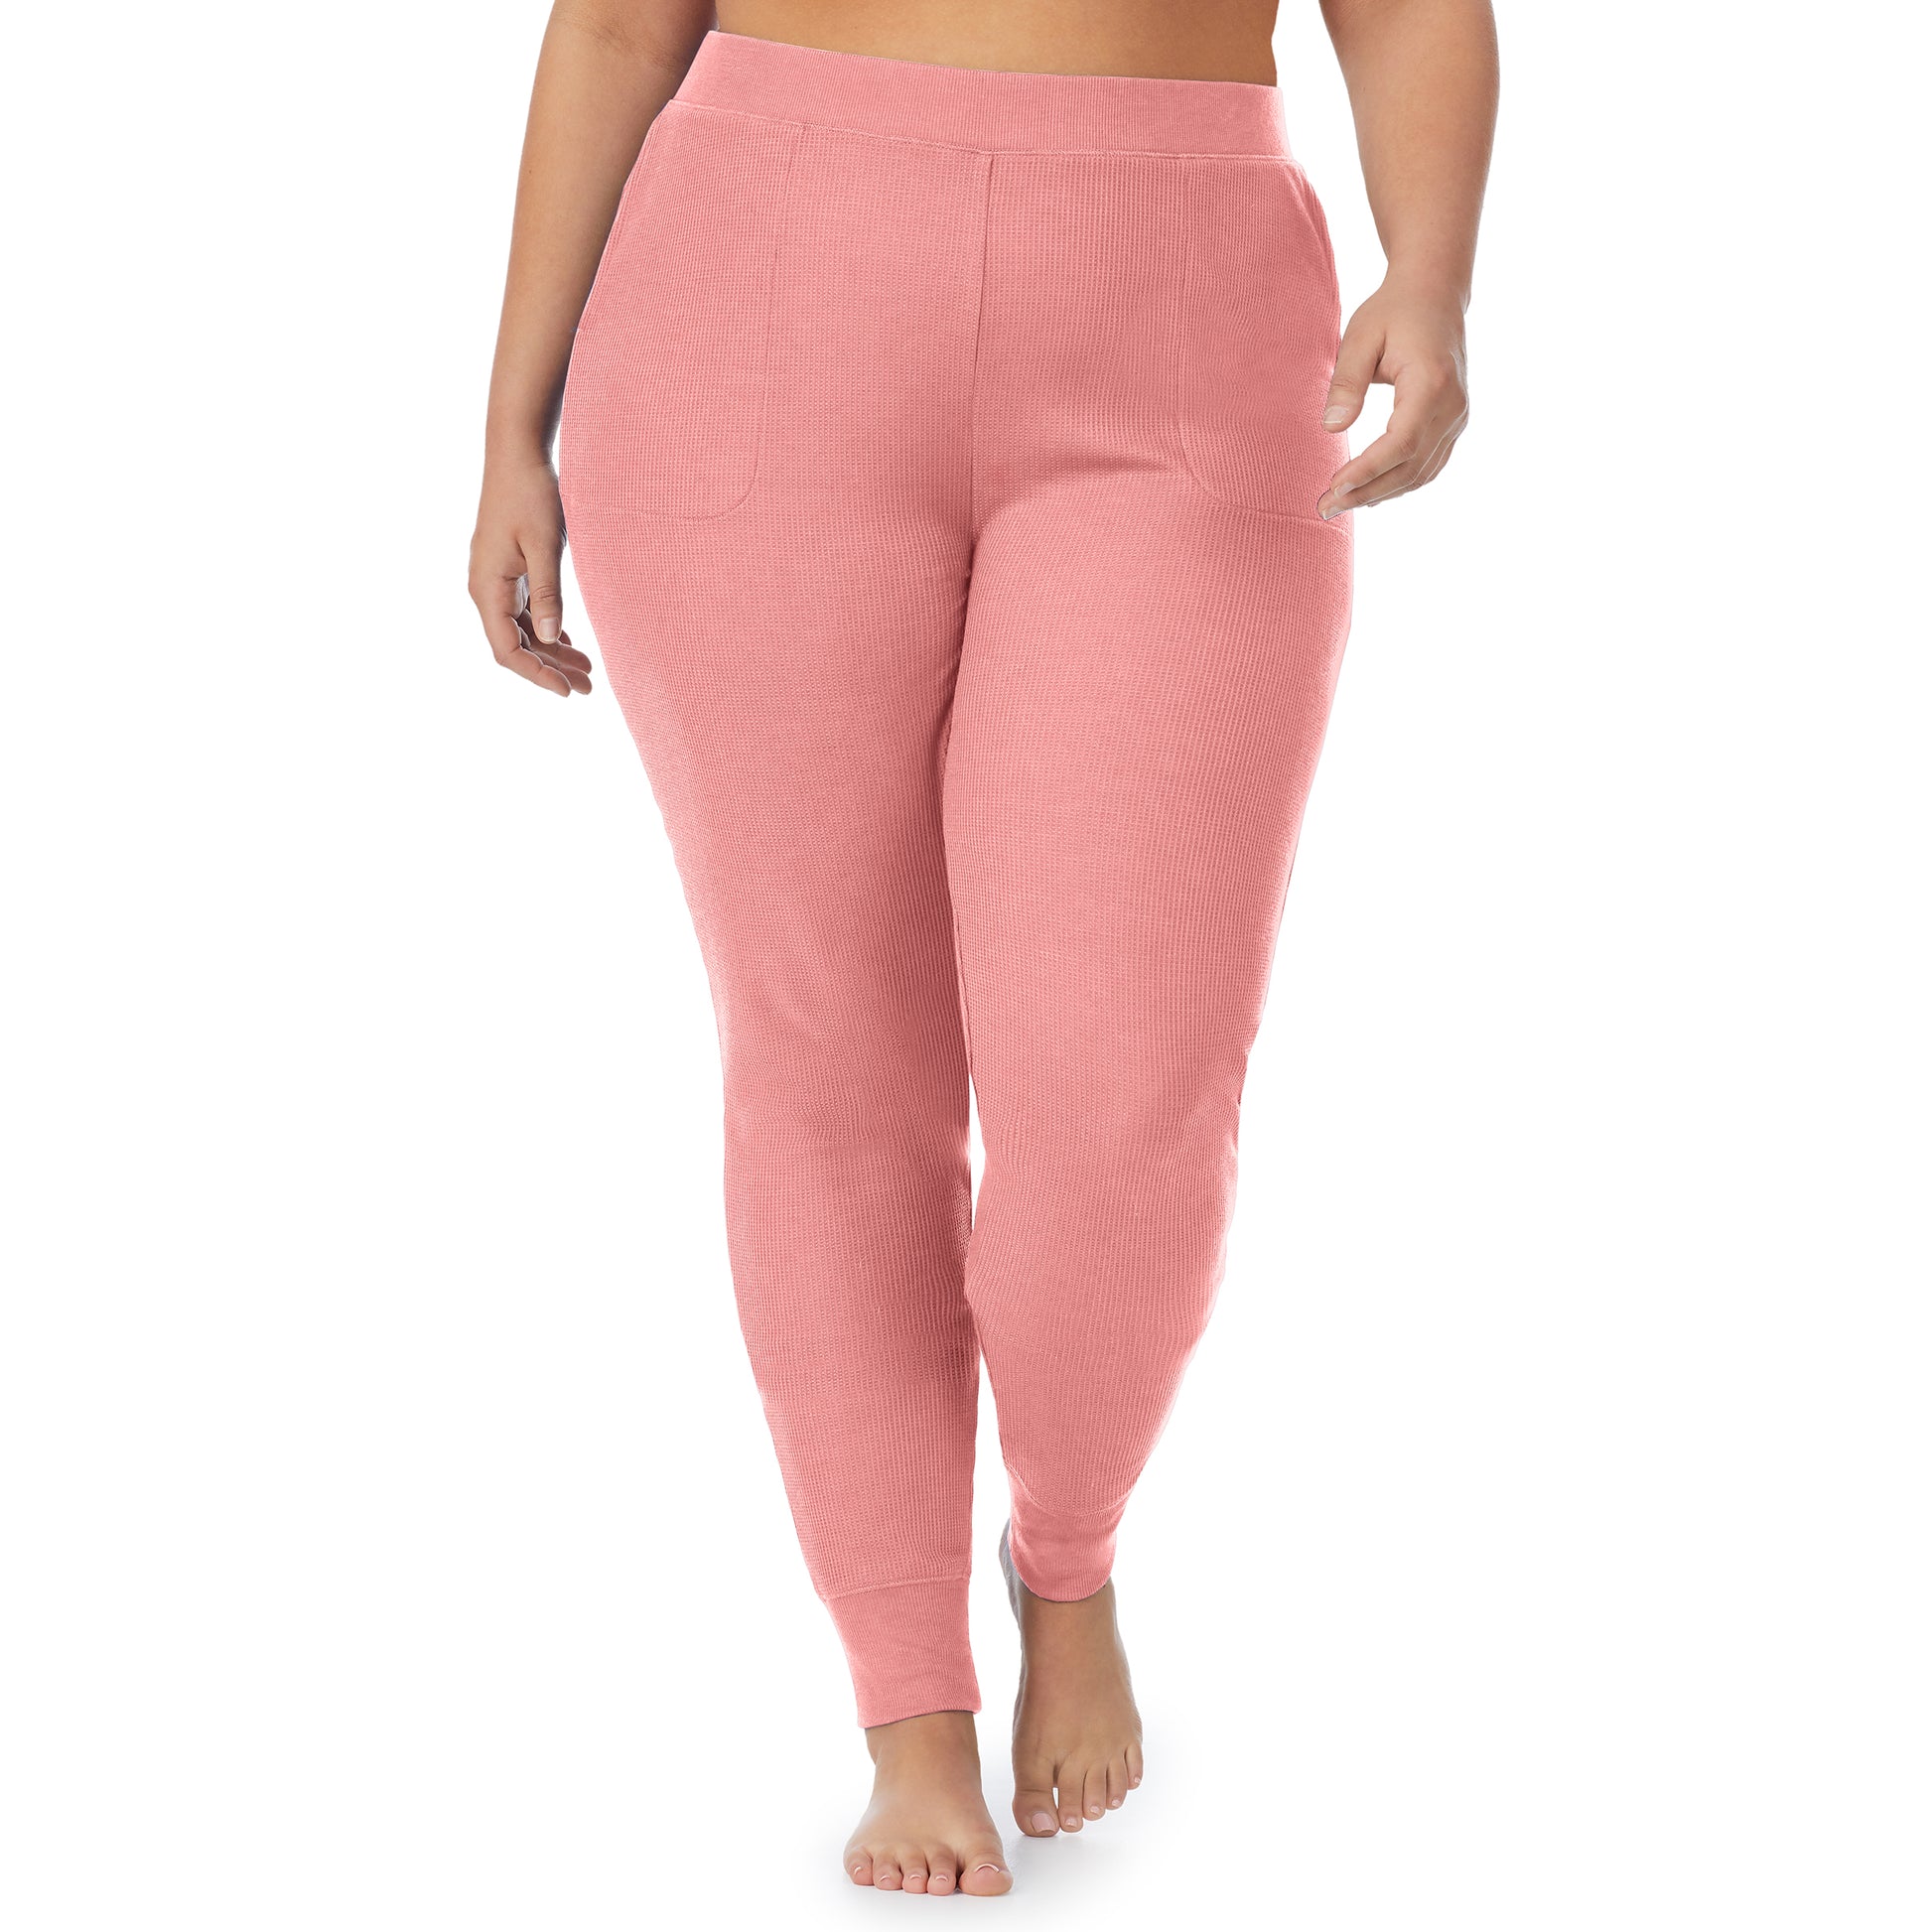 Bright Coral Heather;Model is wearing size 1X. She is 5'9", Bust 38", Waist 36", Hips 48.5". @A lady wearing a bright coral heather legging plus.